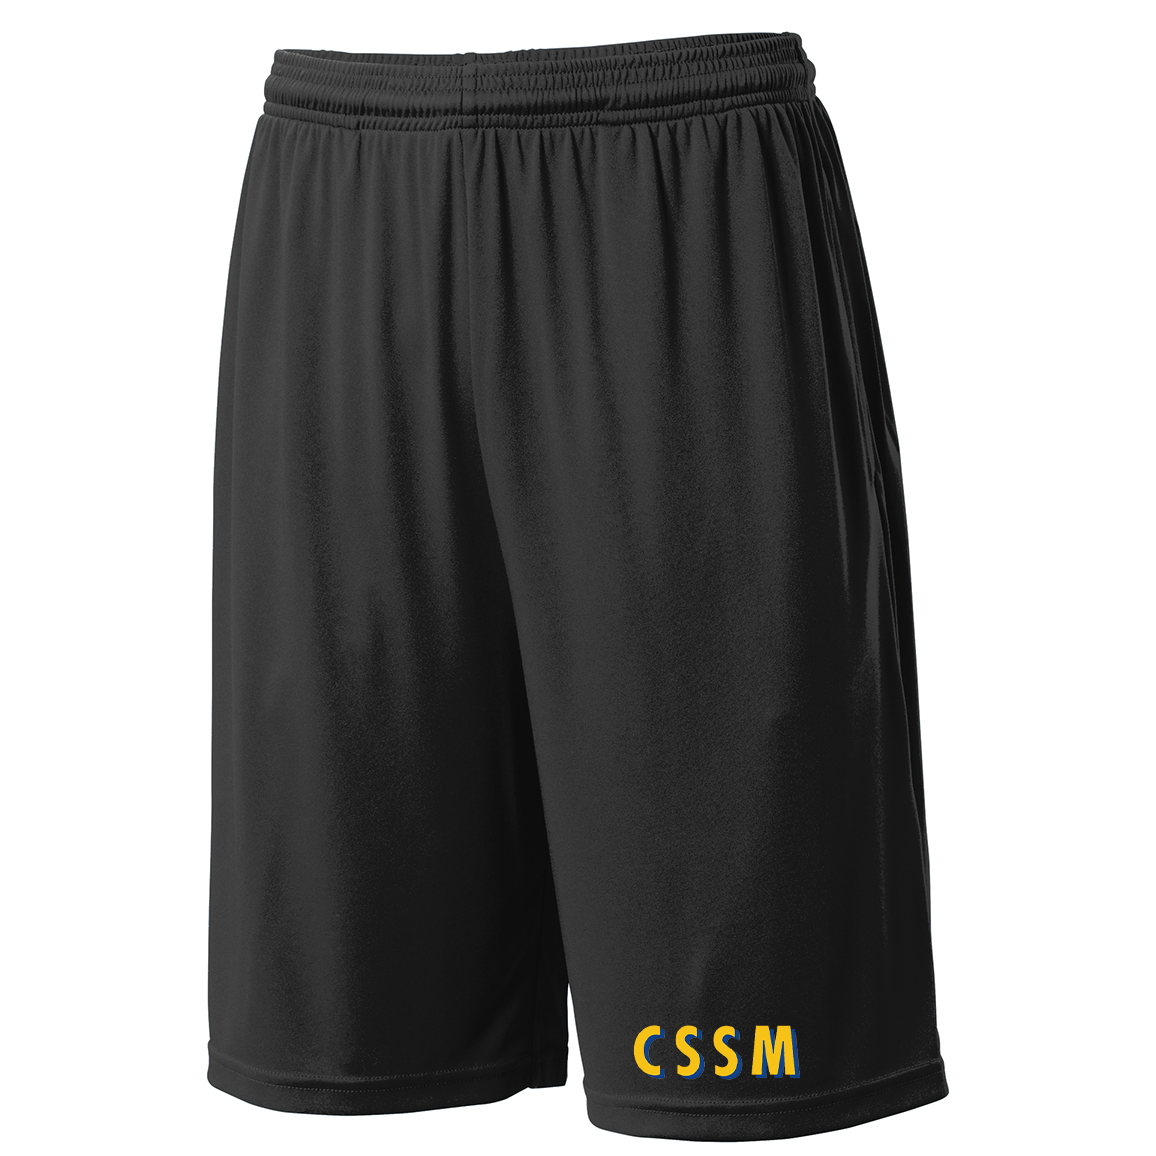 Cleveland School of Science and Medicine Shorts